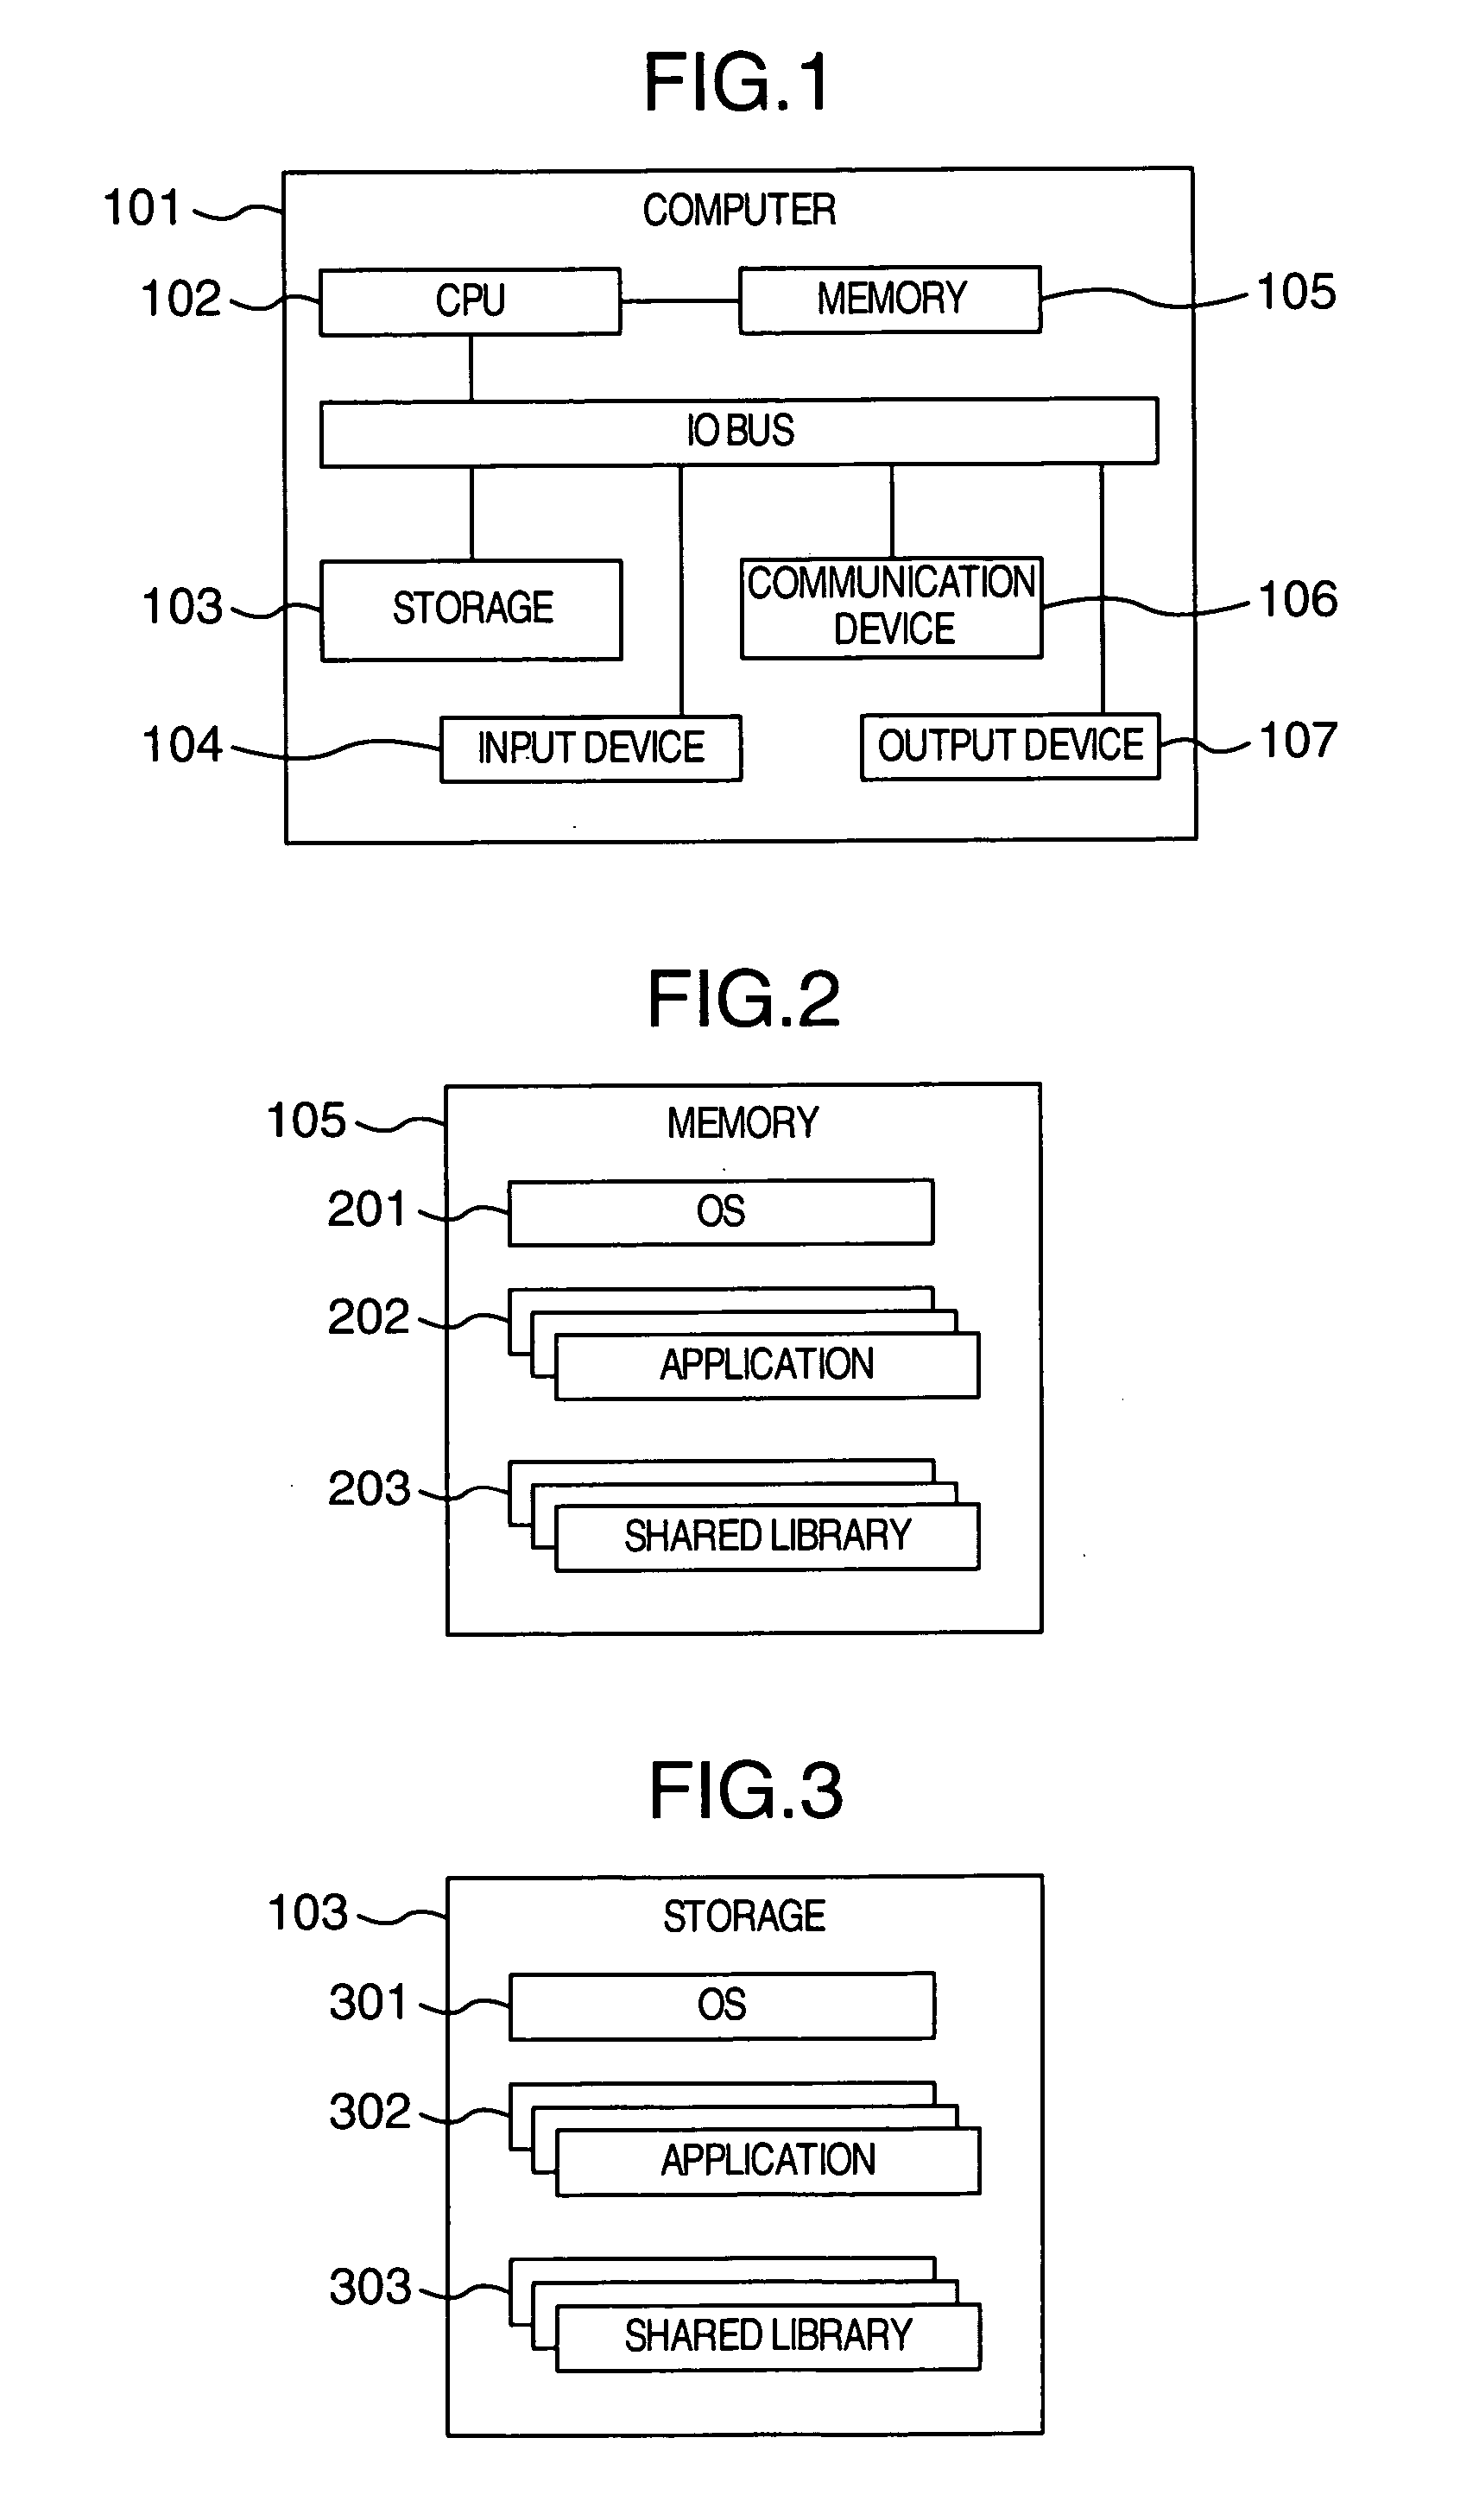 Method of calling an export function stored in a shared library